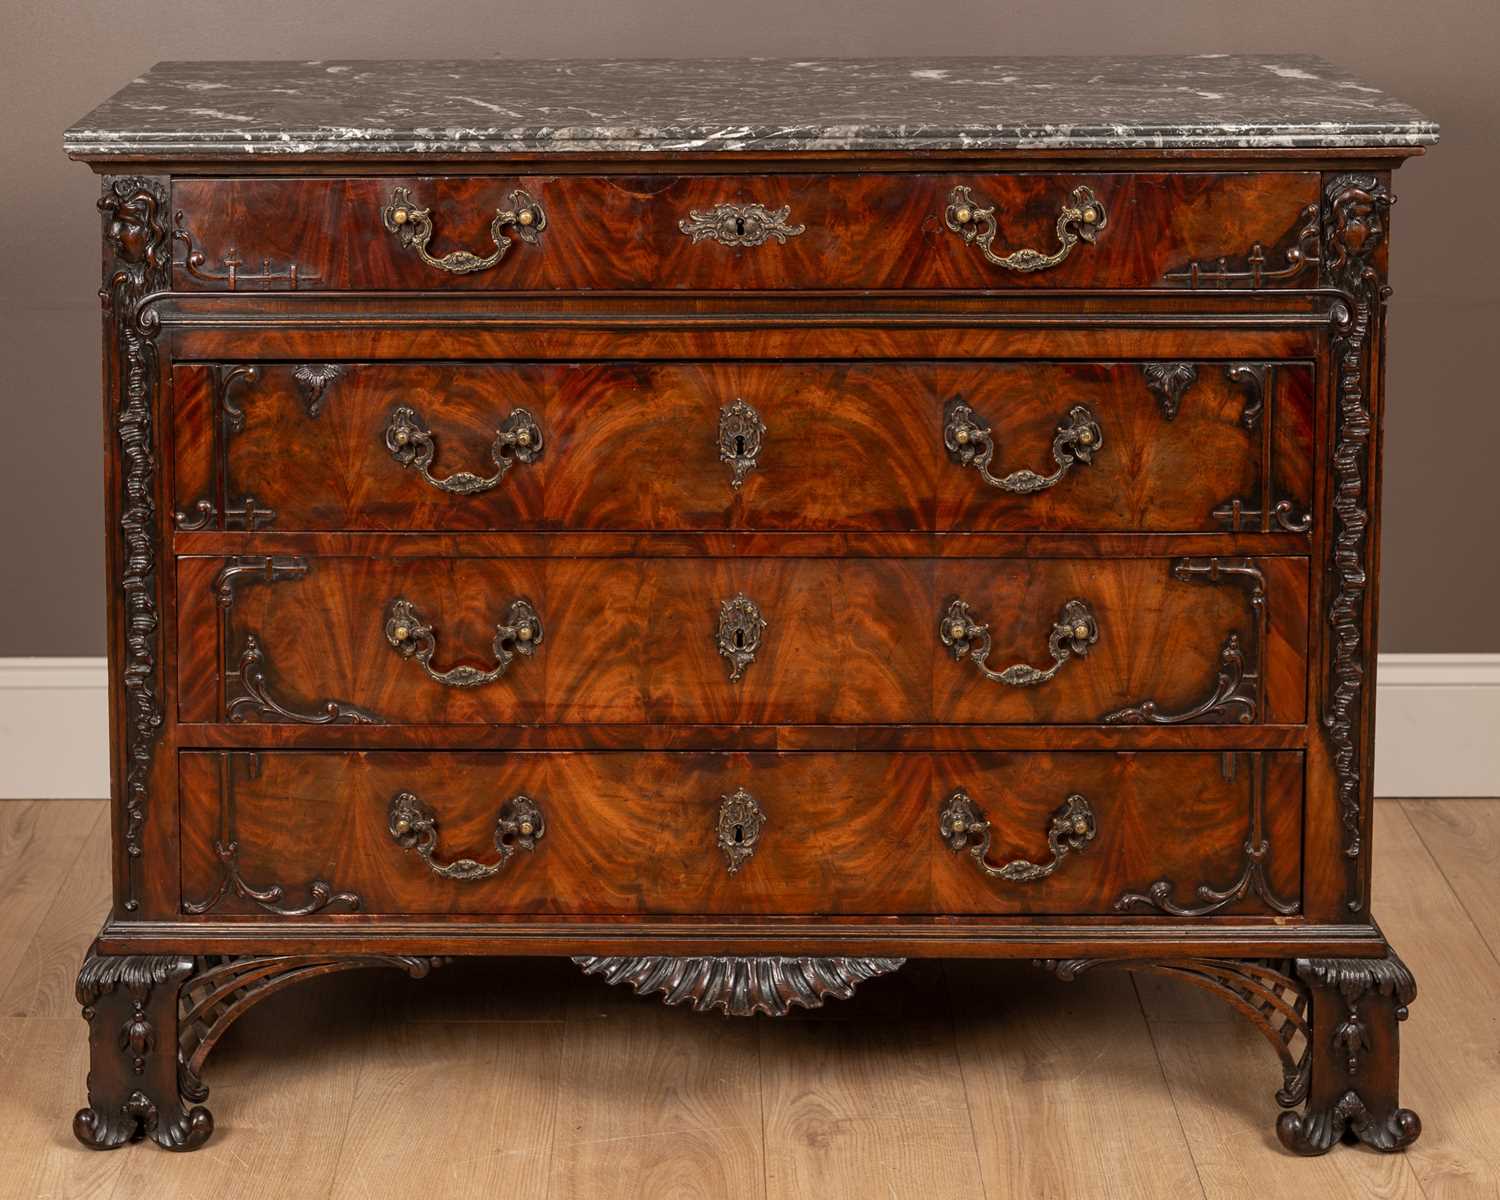 Lot 78 - An 18th century style Irish mahogany chest of drawers with a marble top in the Chippendale style